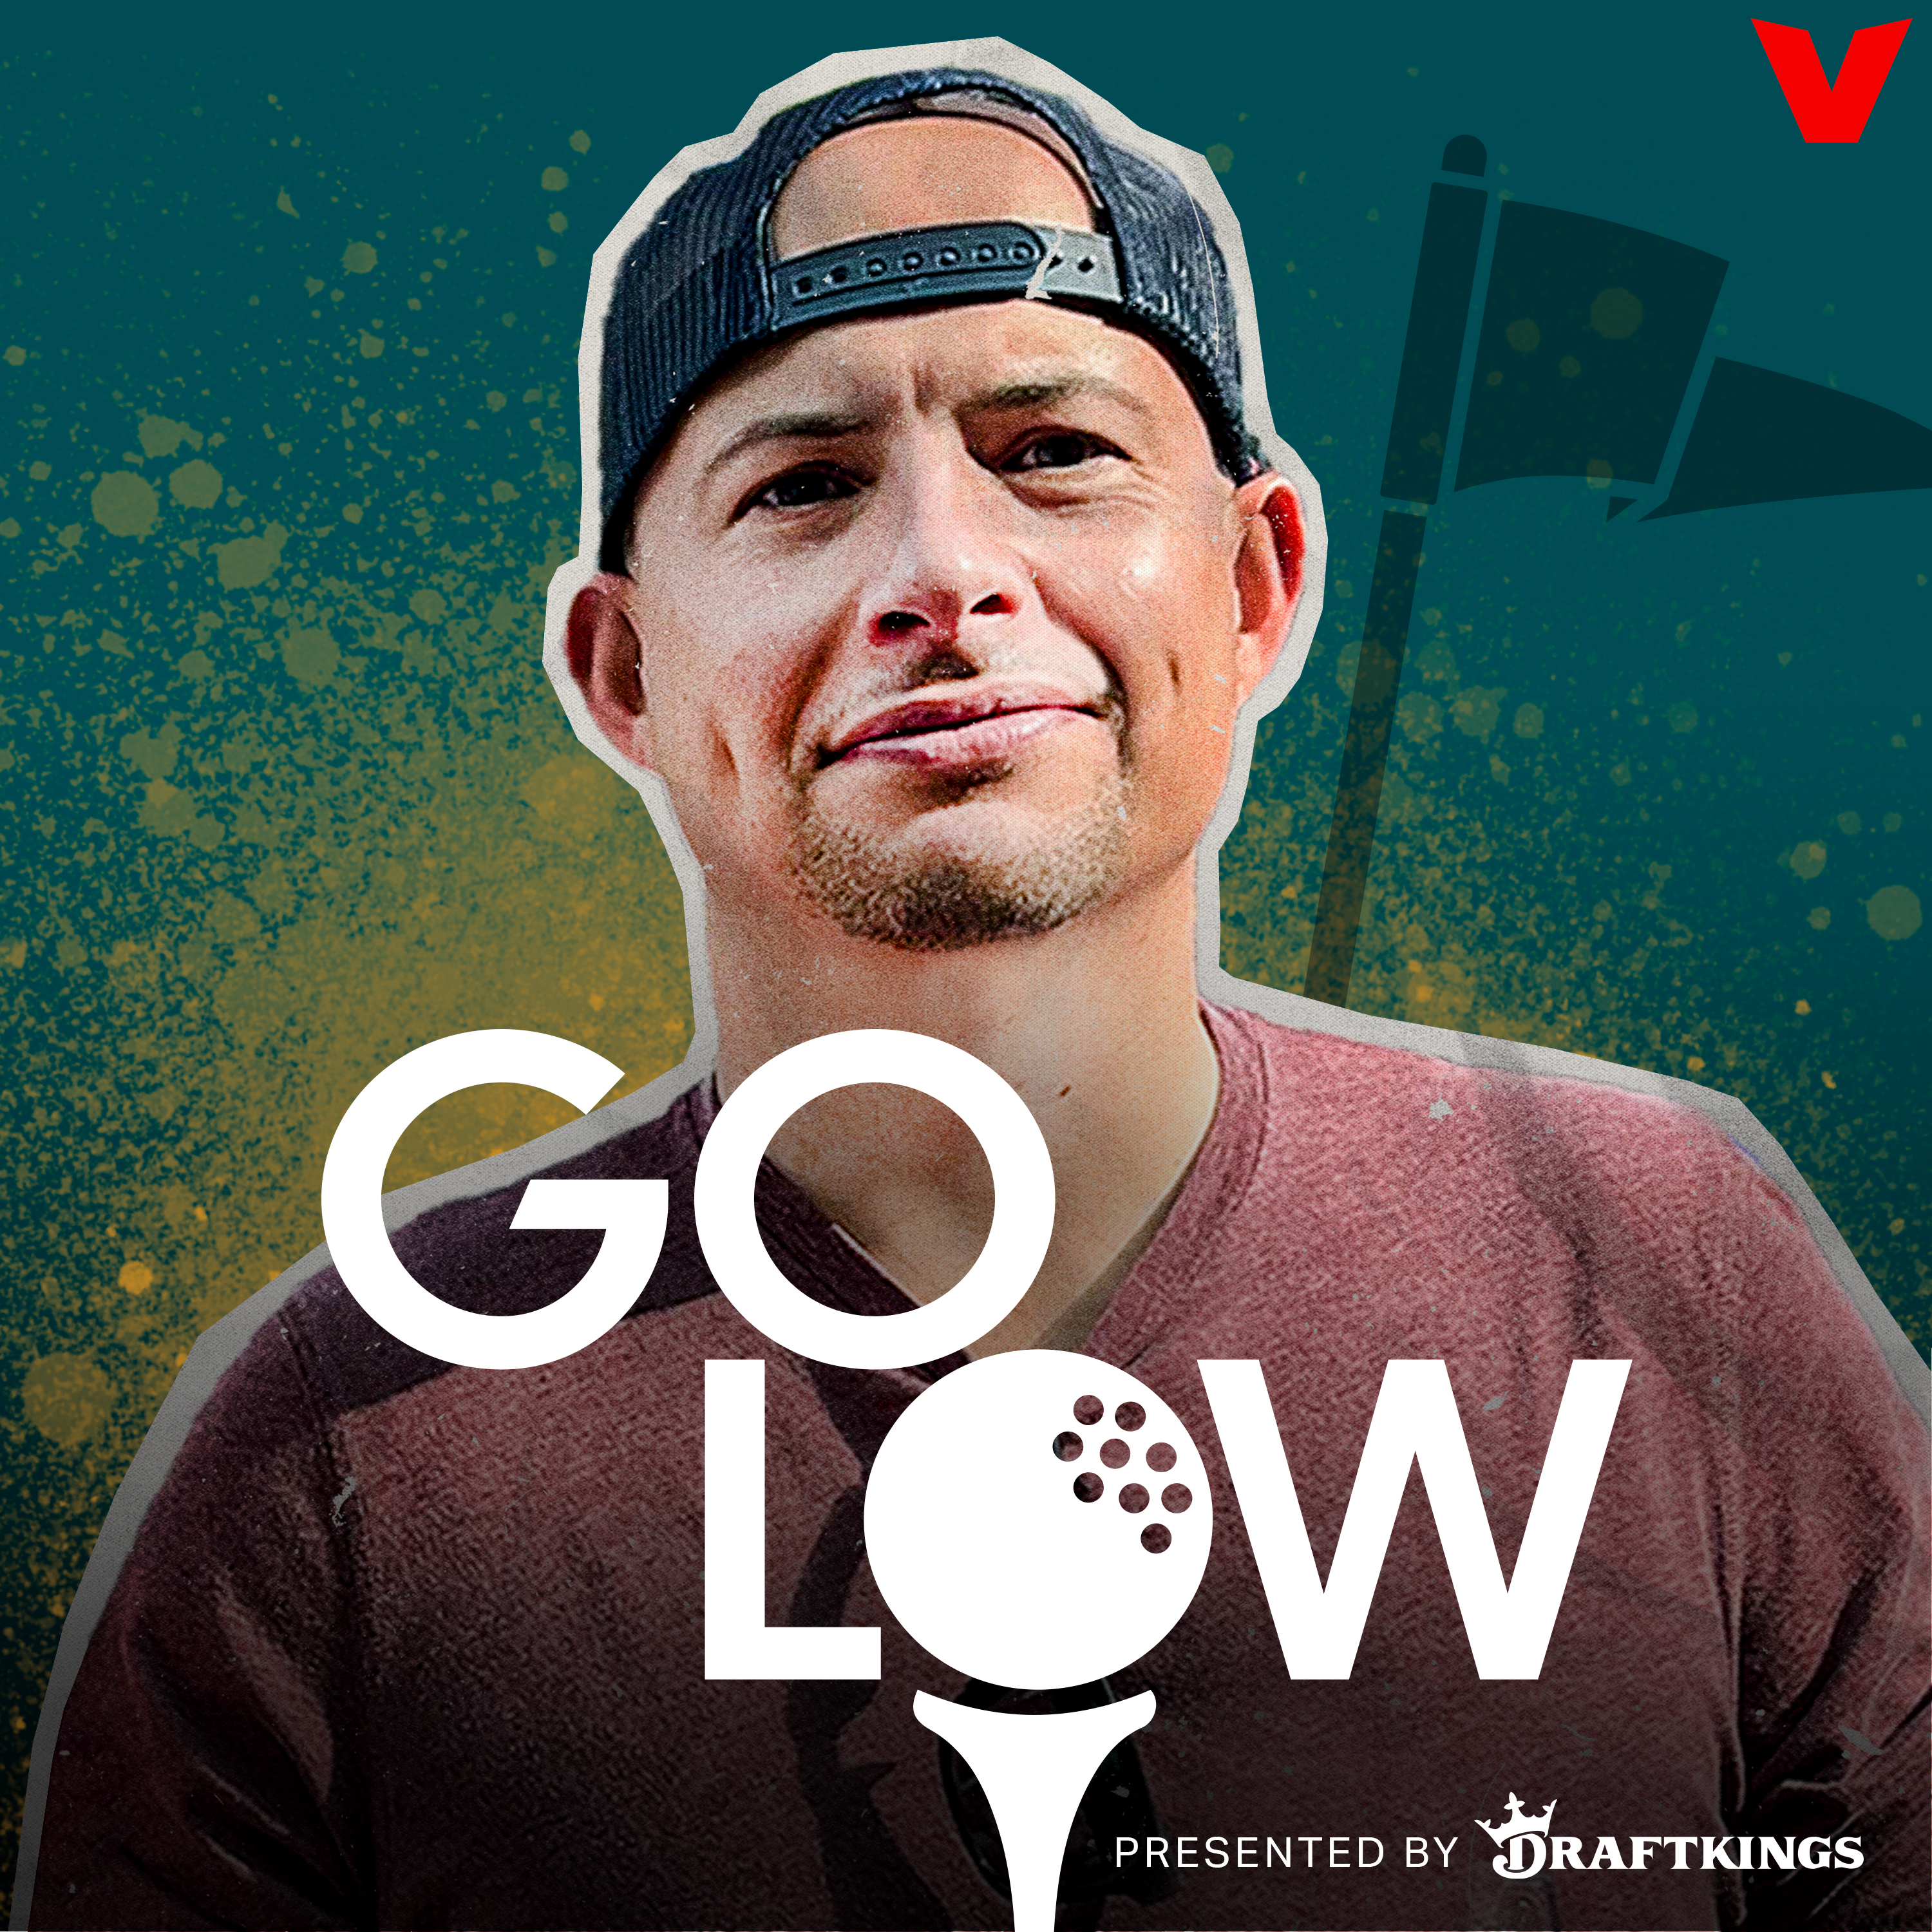 Go Low - The latest with Scottie, getting ready for Valhalla, Tiger and his clothing line